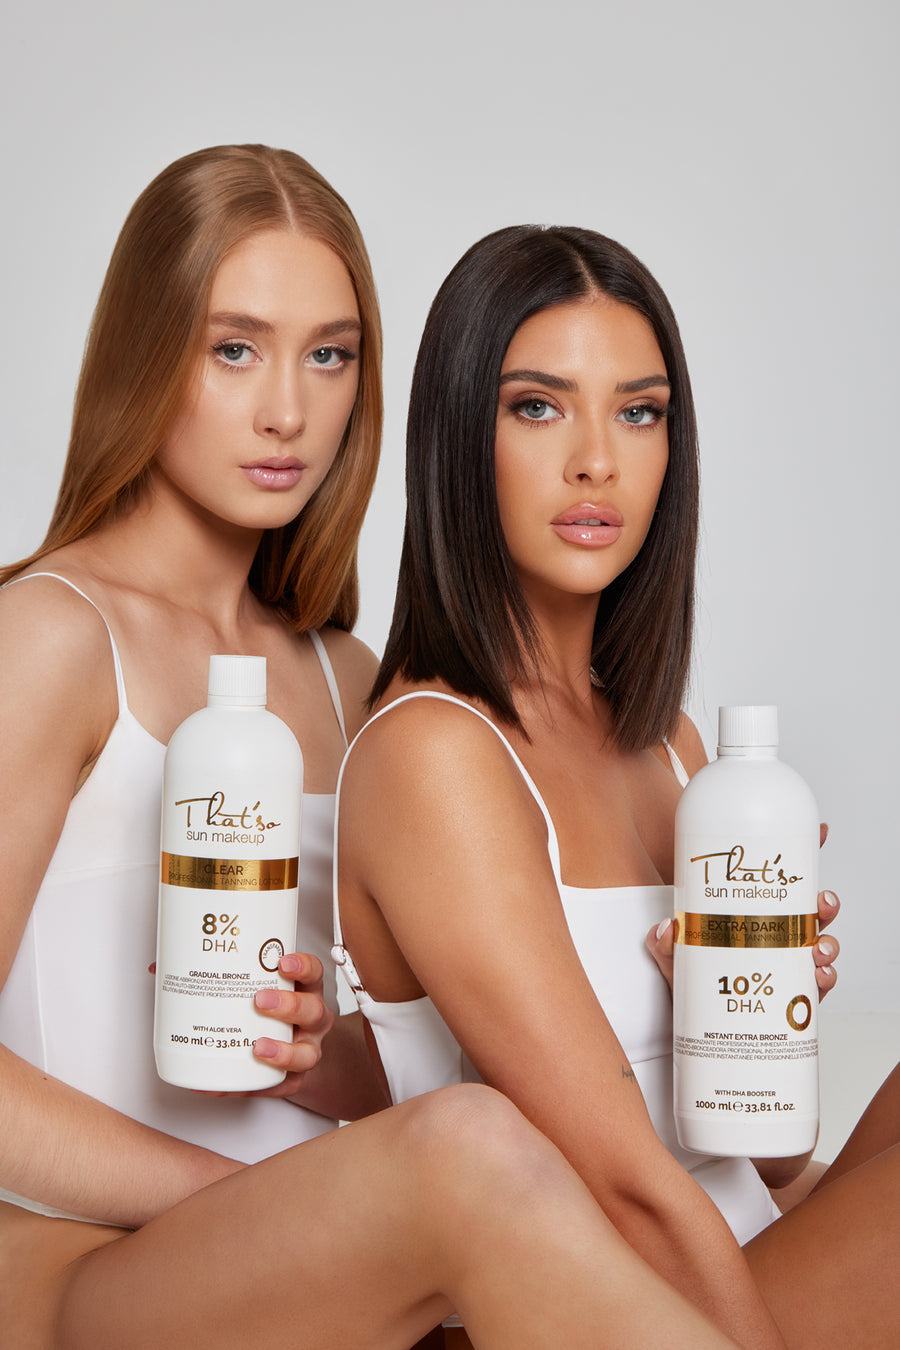 PRO - SPRAY TANNING MAKEUP CLEAR 8%